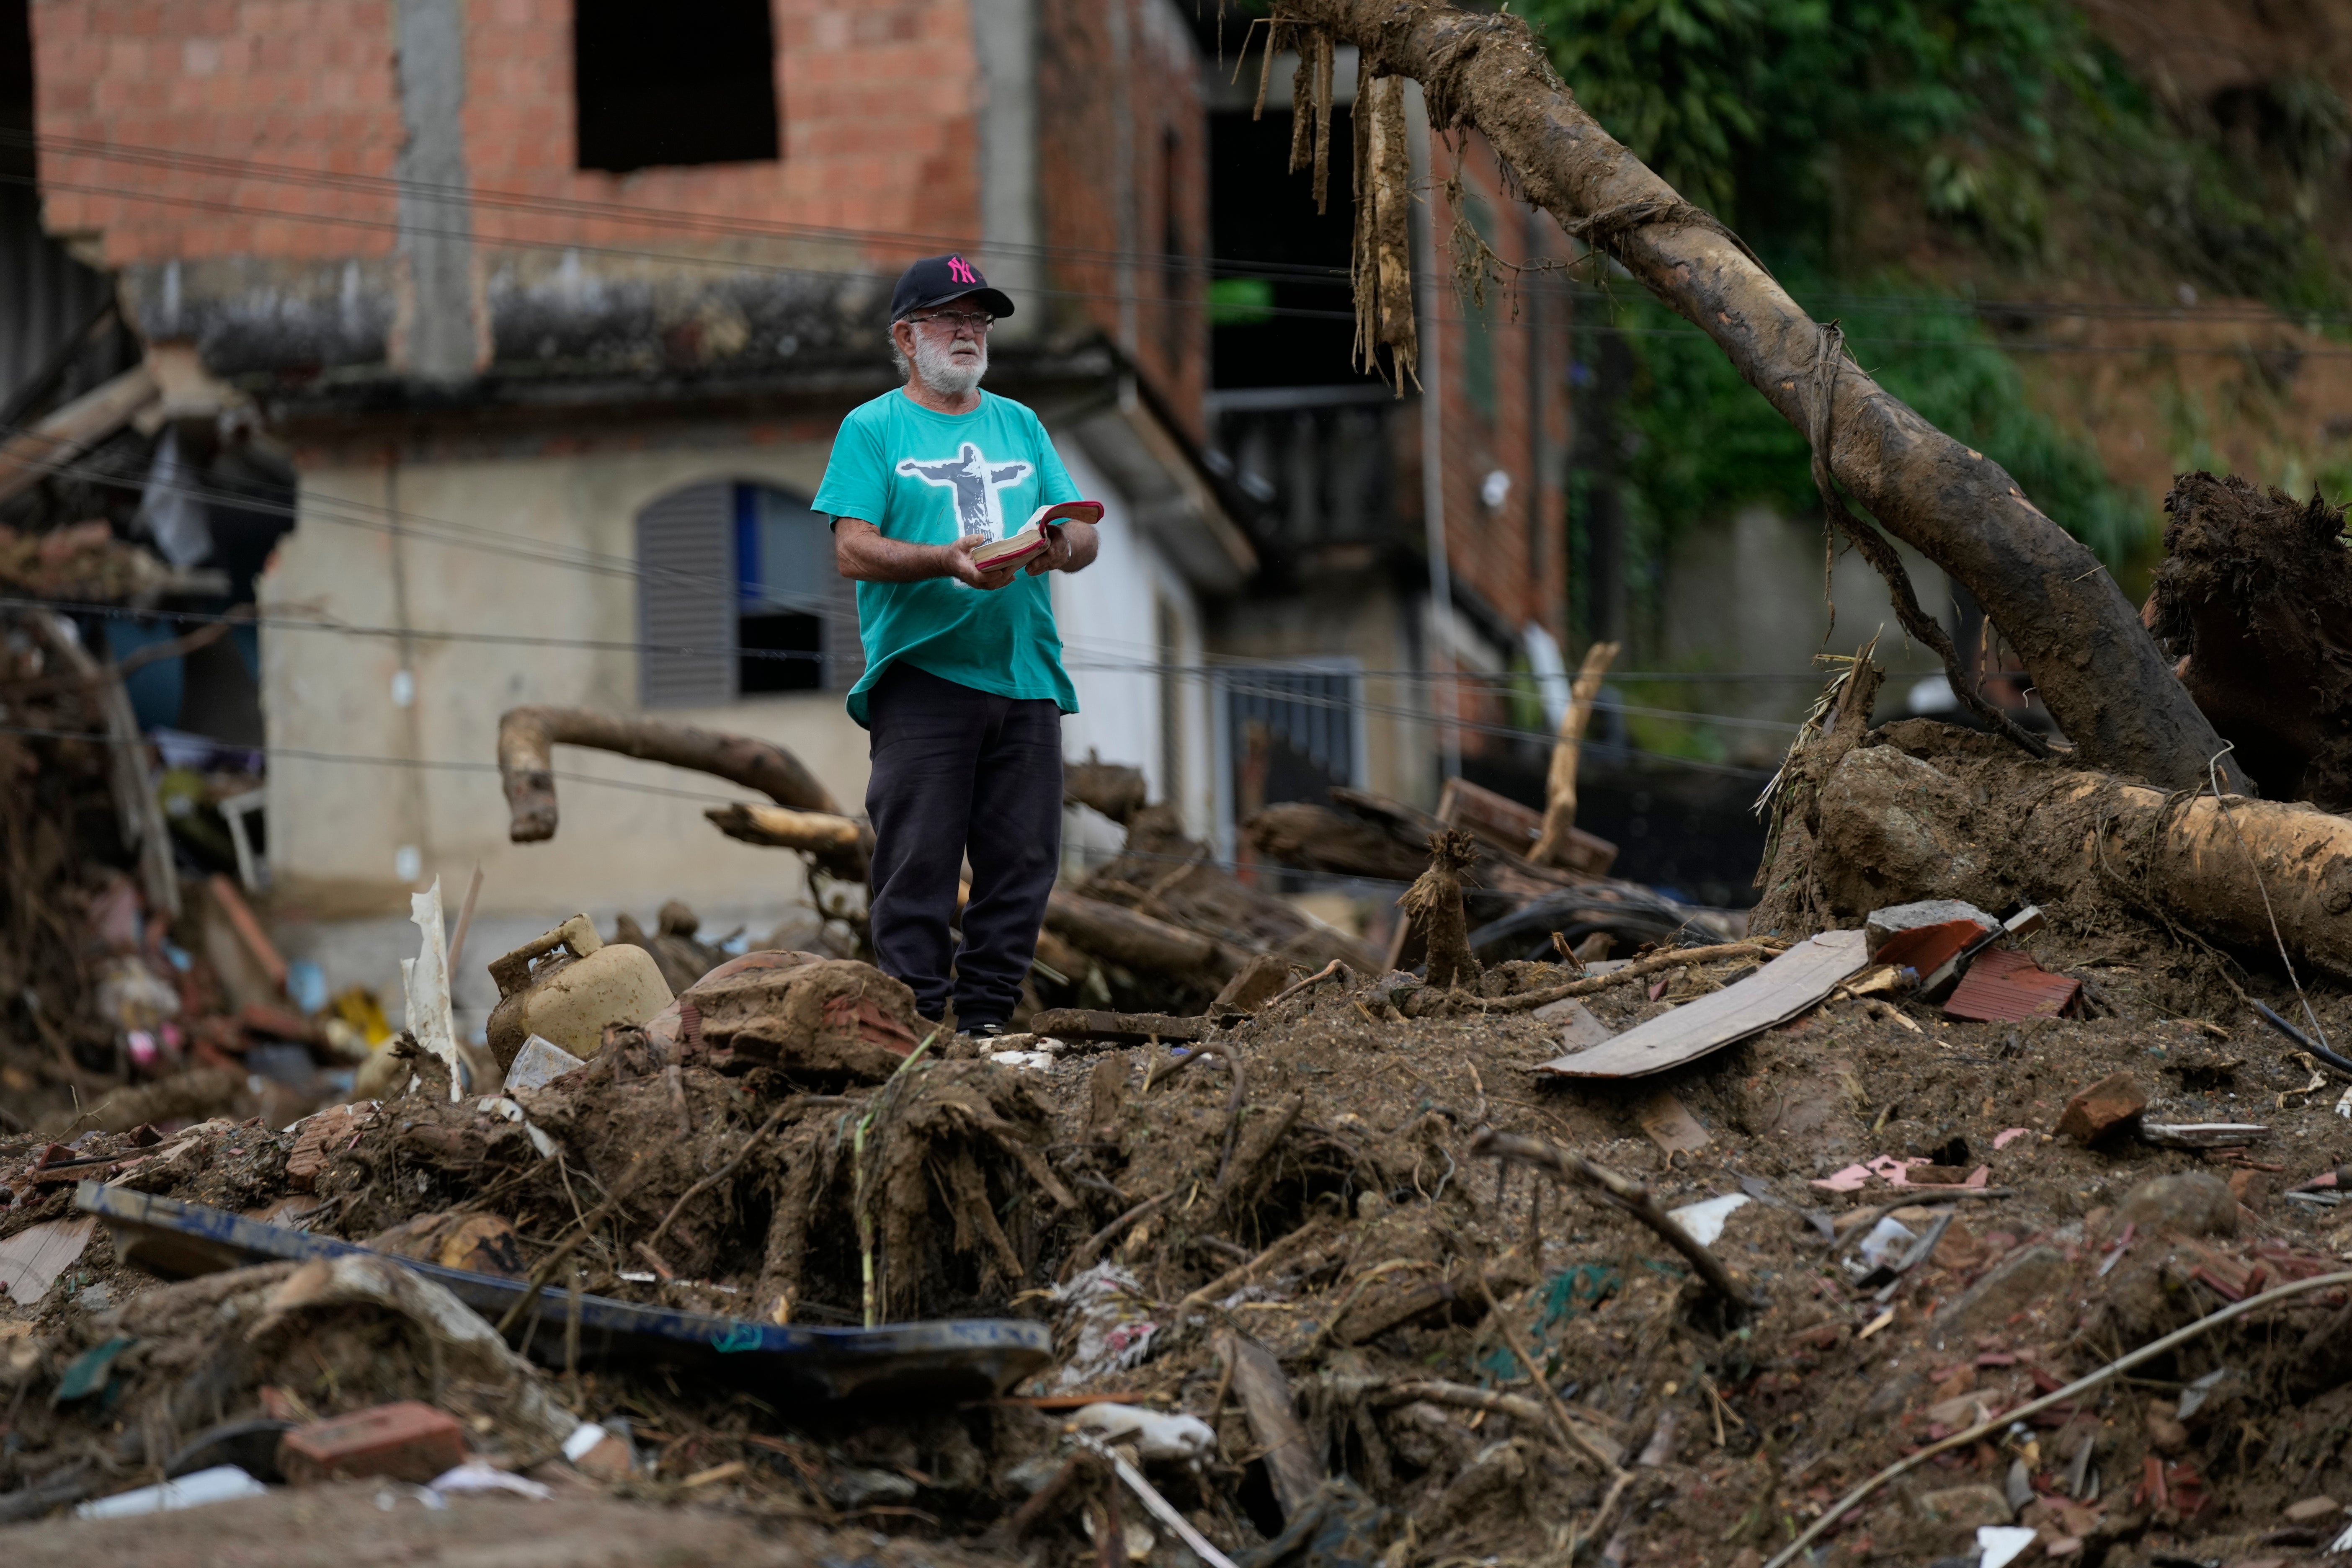 More than 1,500 people have died in similar landslides in recent decades in that portion of the Serra do Mar range